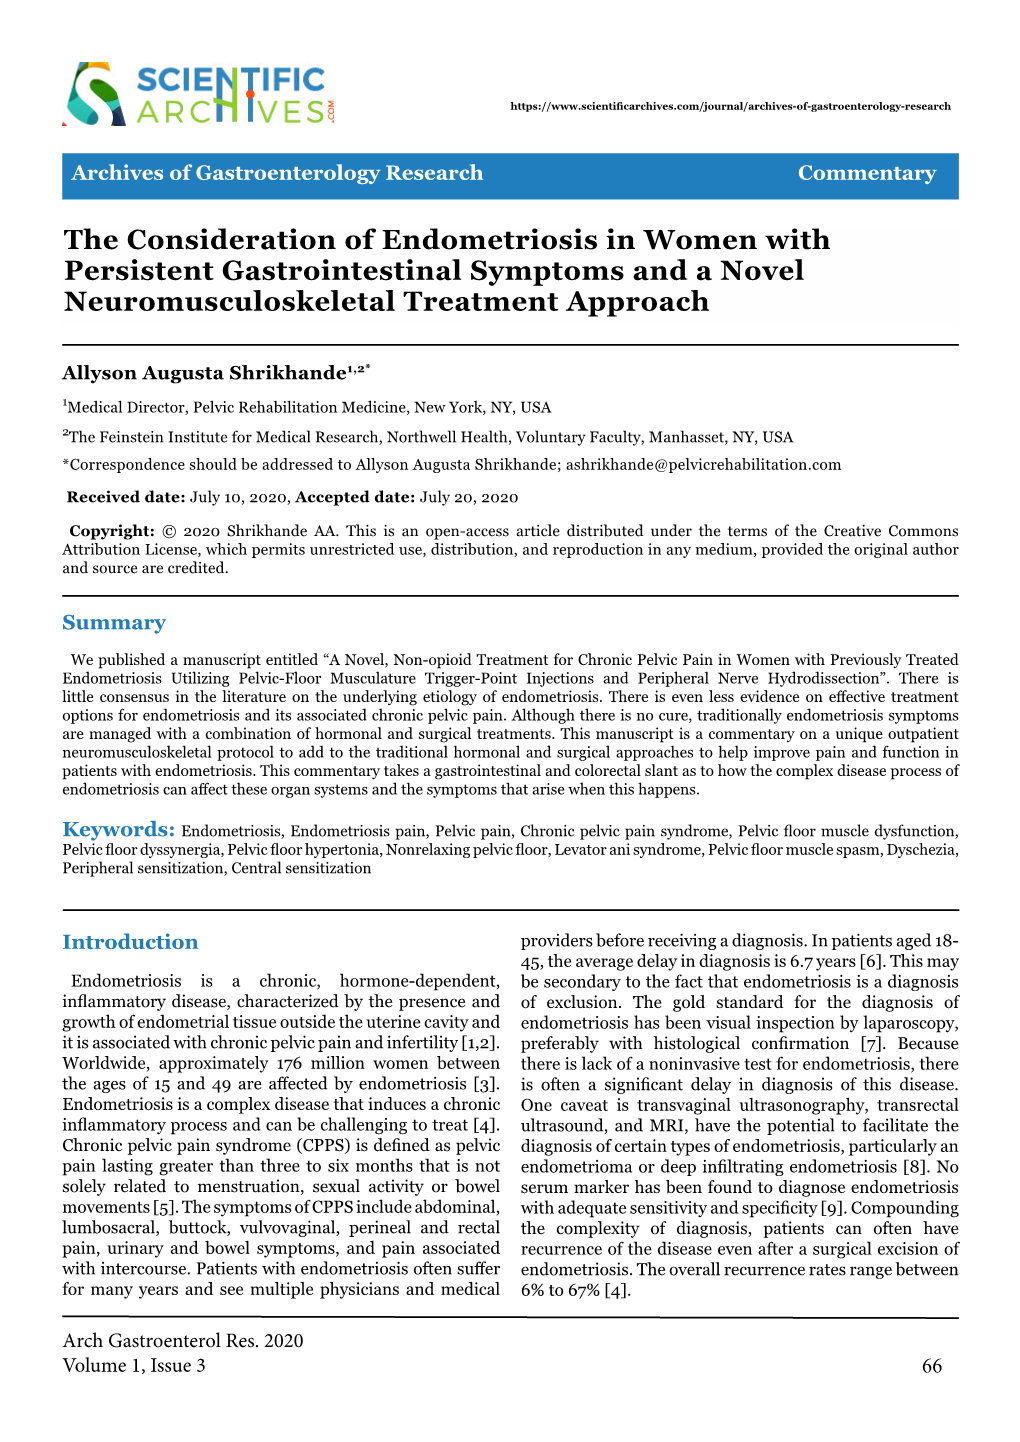 The Consideration of Endometriosis in Women with Persistent Gastrointestinal Symptoms and a Novel Neuromusculoskeletal Treatment Approach